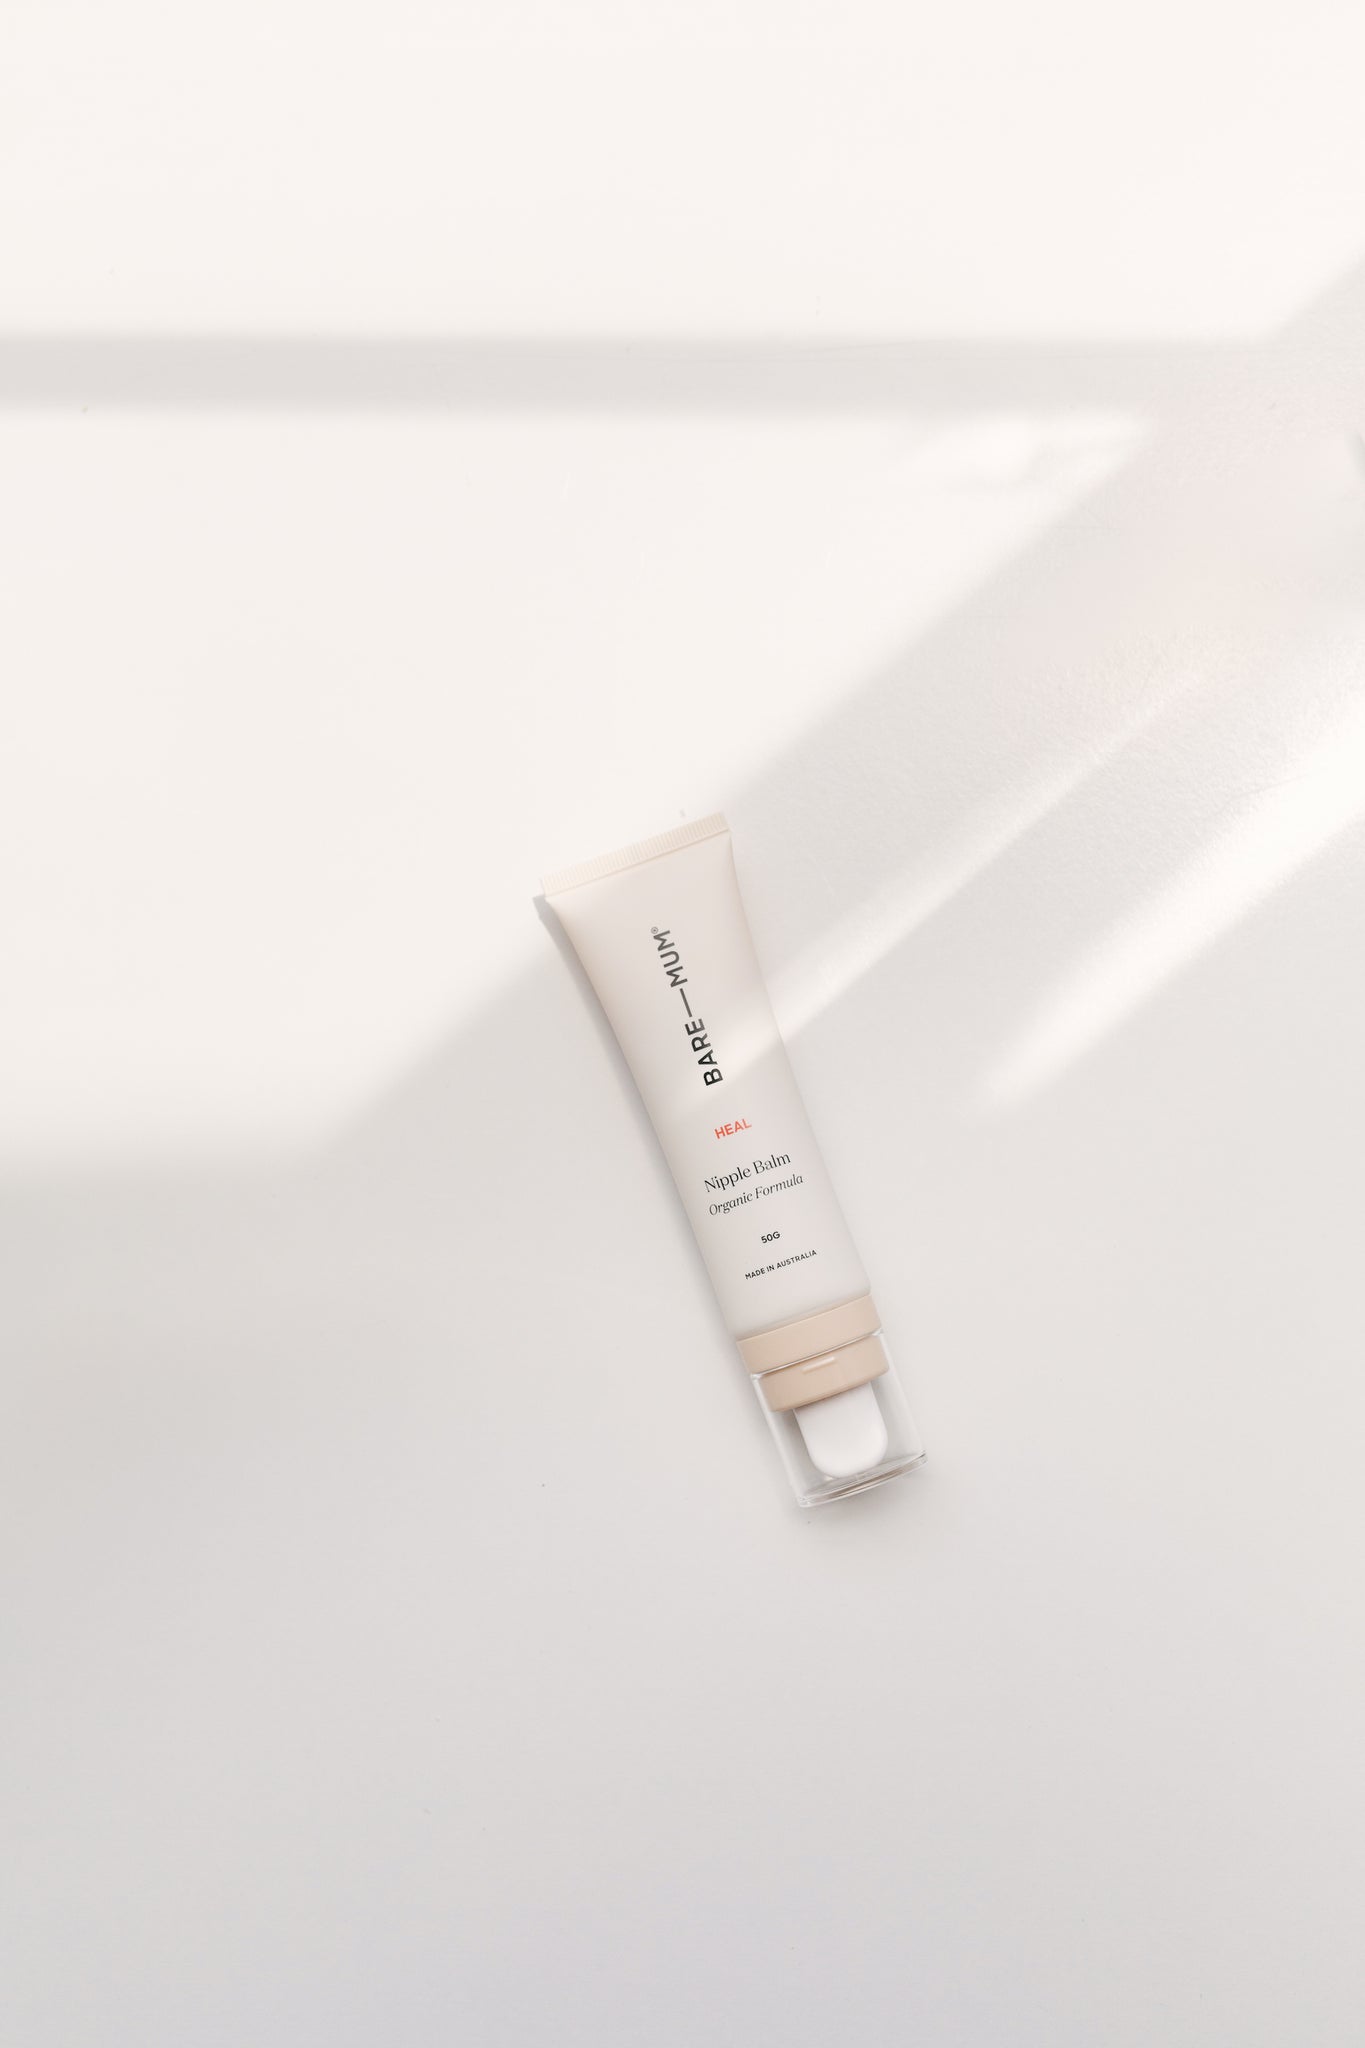 A tube of Bare Mum Breast Care Kit cream sitting on a white surface, dedicated to mothers and breastfeeding.